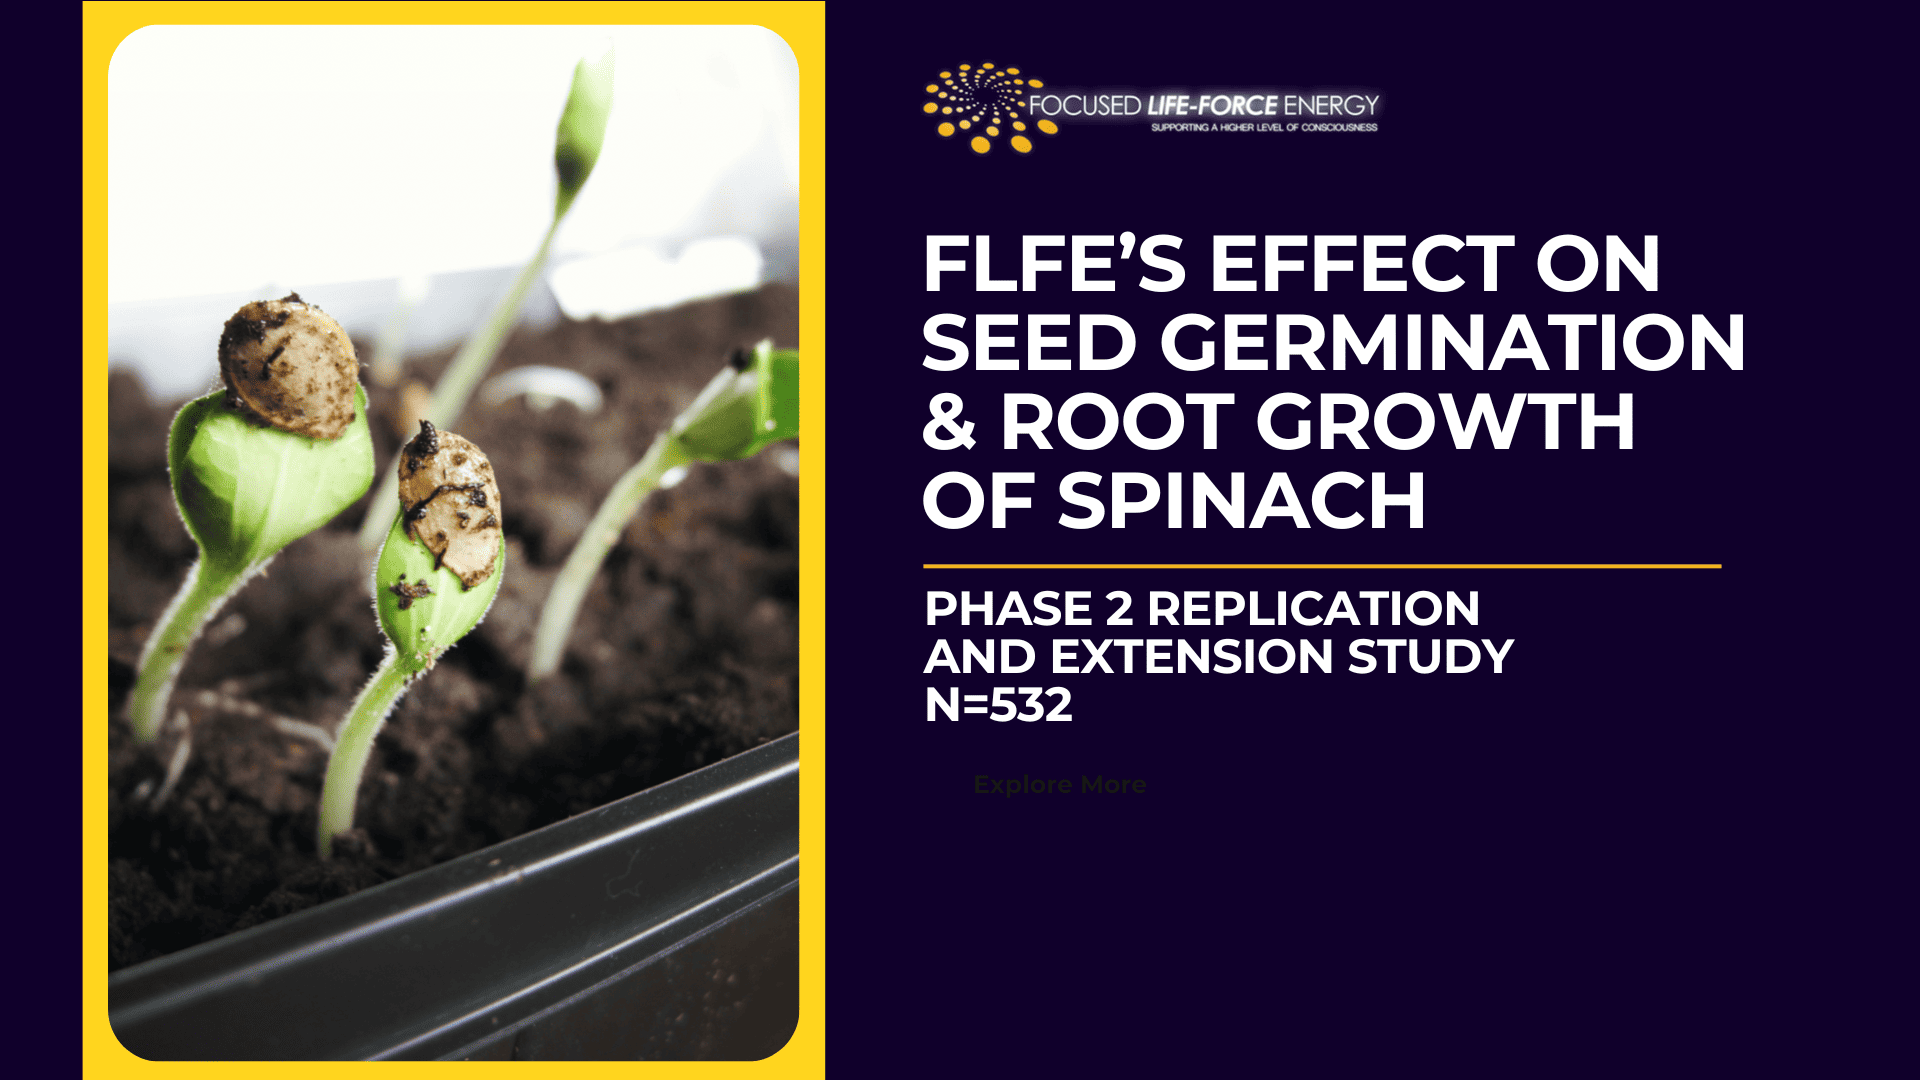 SEED SPINACH